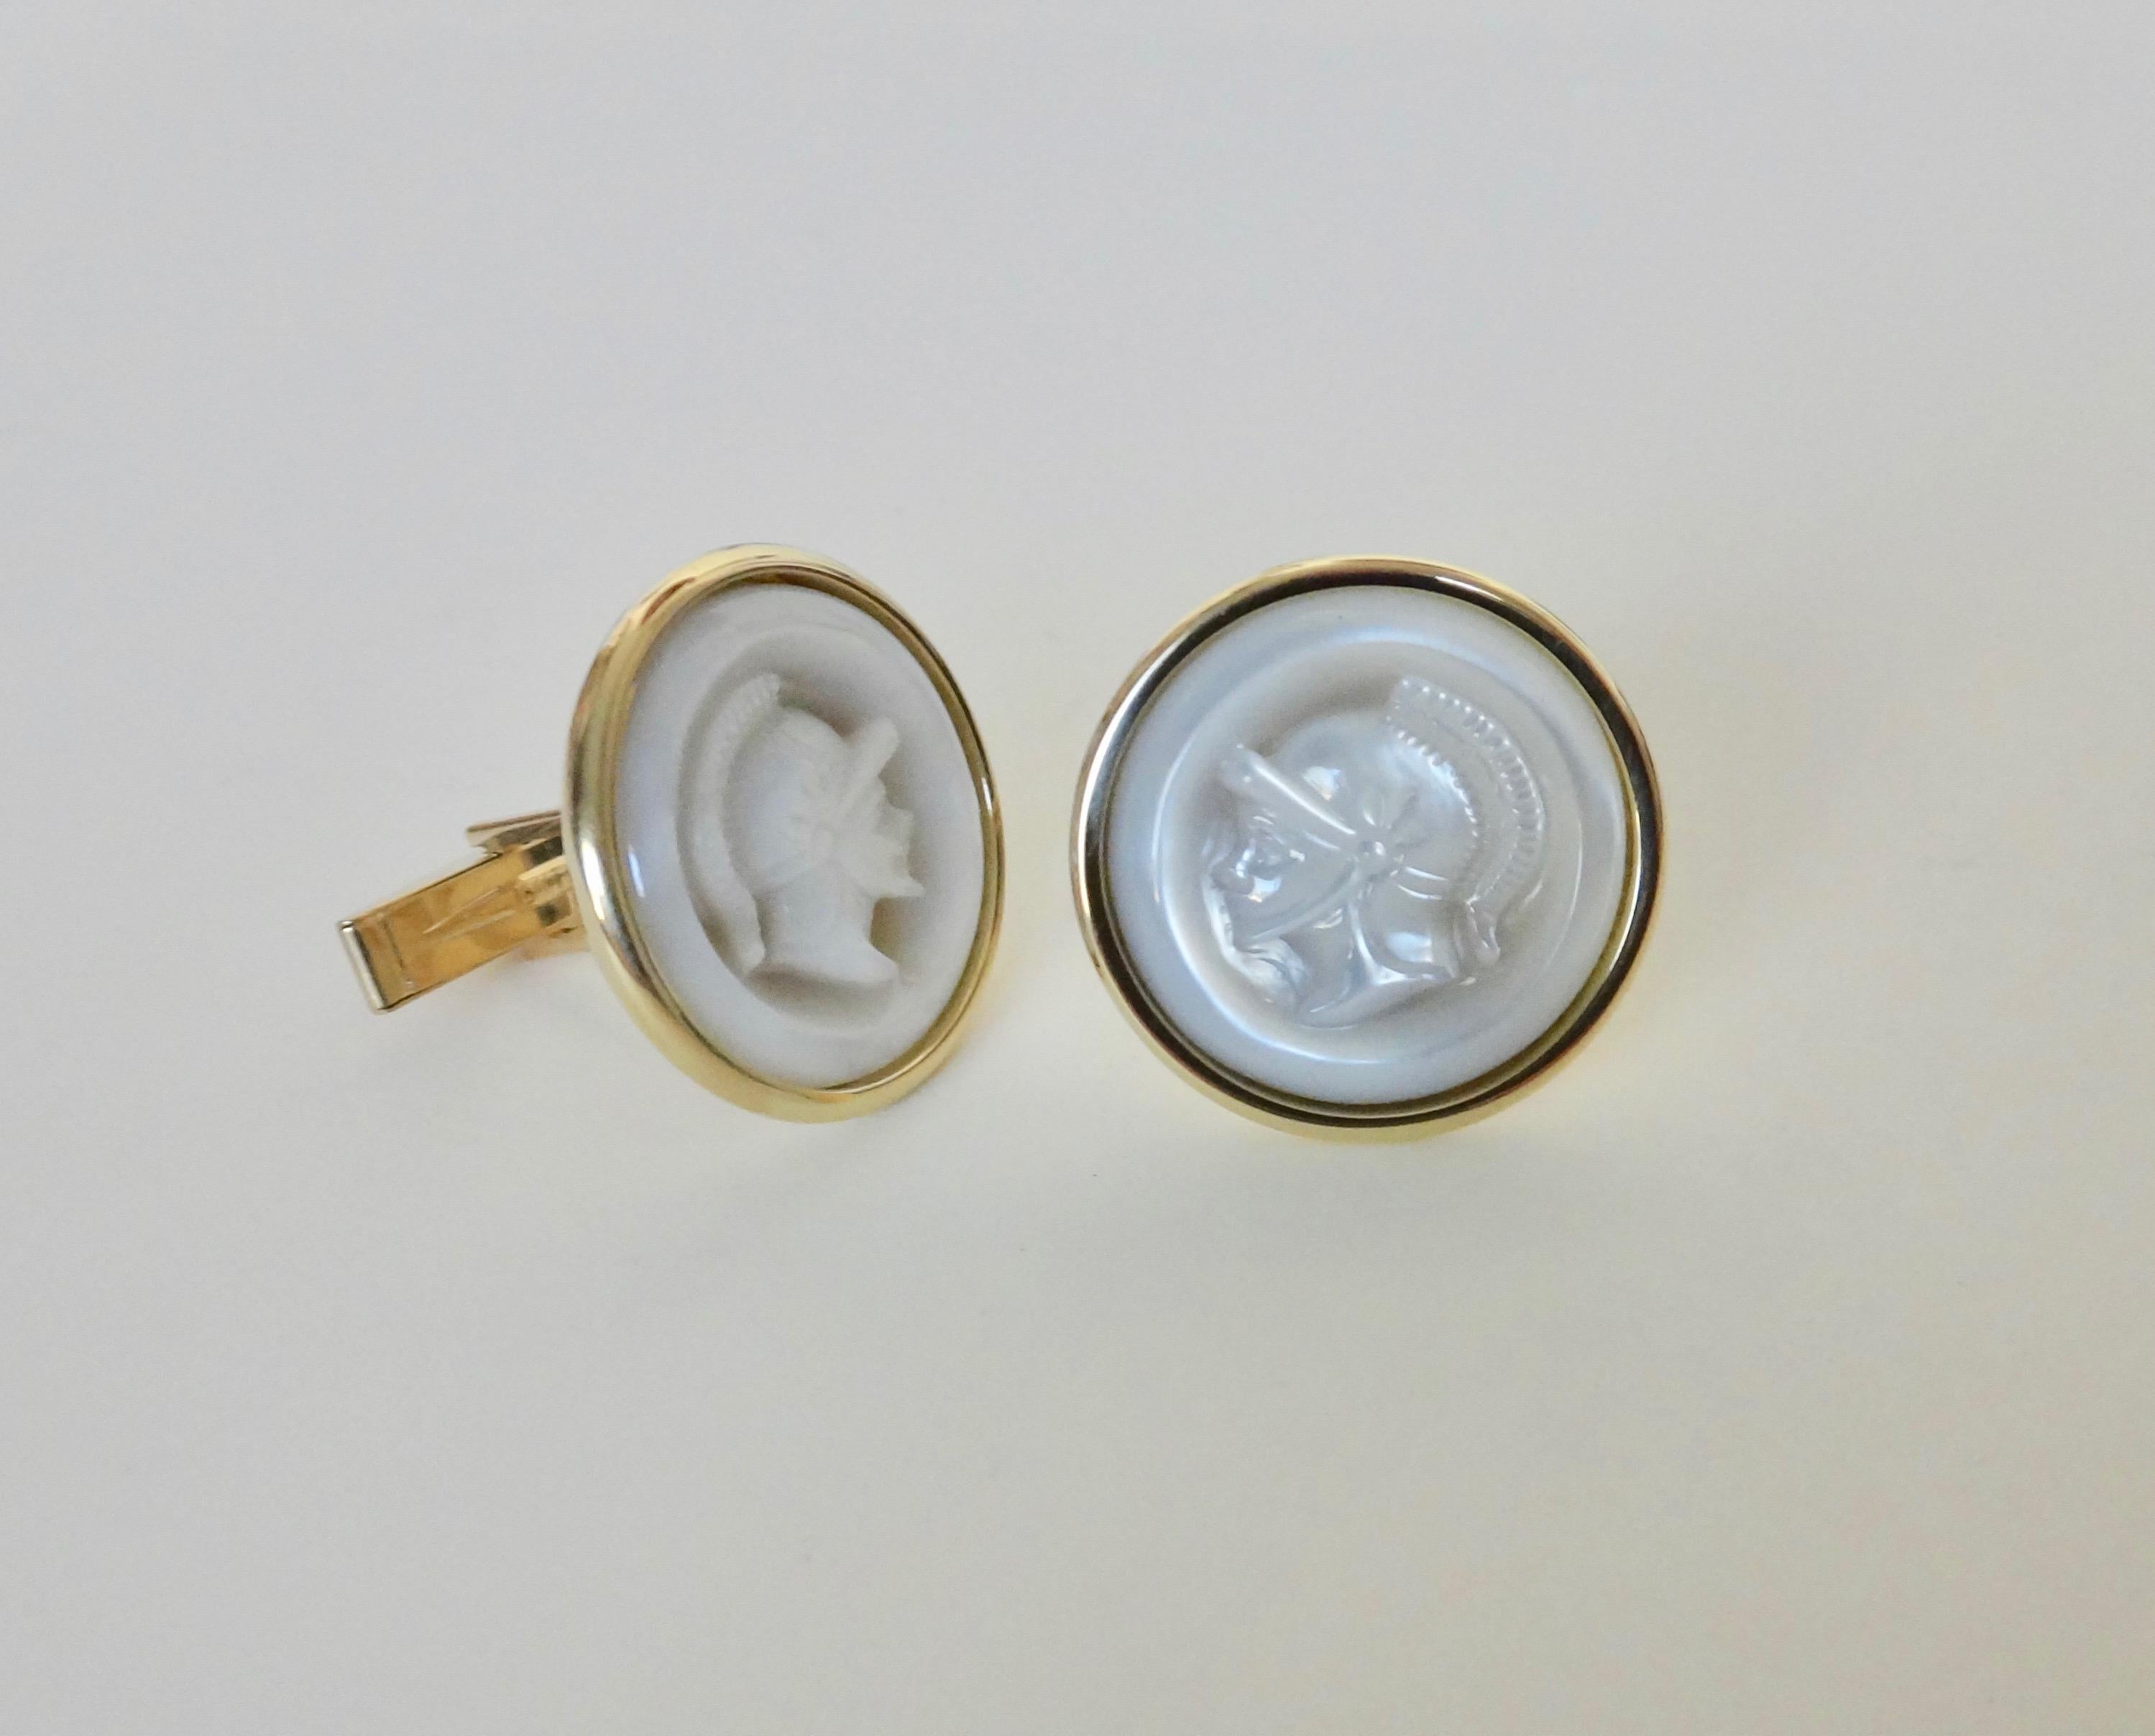 Carved in Germany, a classically sculpted pair of mother-of-pearl gladiator head cameos are featured in these one-of-a-kind, 18k yellow gold cuff links.  Sleek and time-honored, the pair make the perfect gift for the discriminating gentleman.  